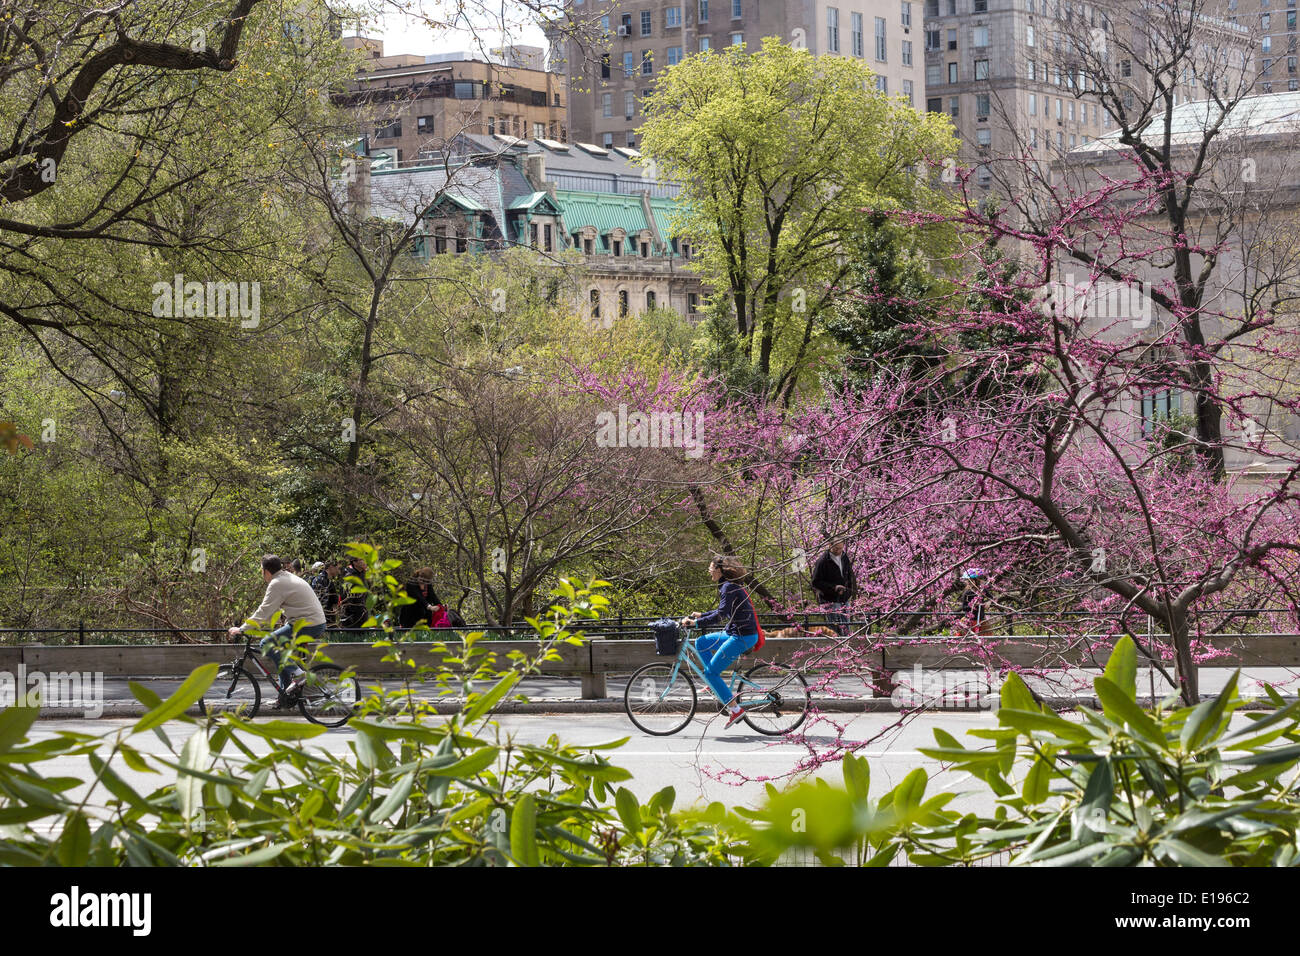 Bicyclists on West Drive, The Metropolitan Museum of Art in Central Park, NYC Stock Photo